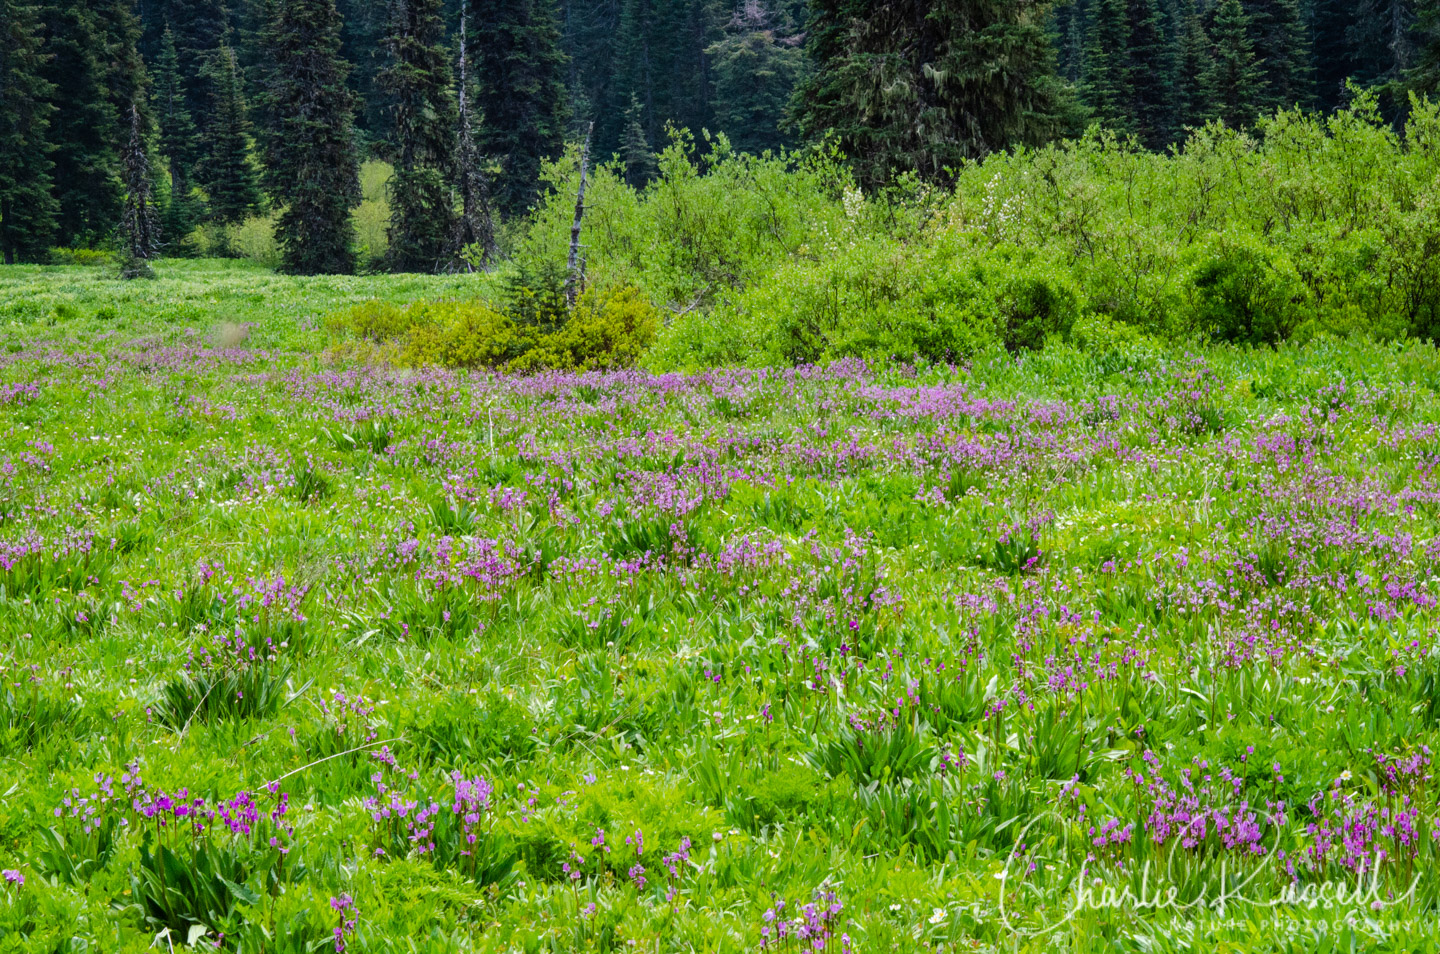 Blair Lake Meadow, meadow with masses of shooting stars